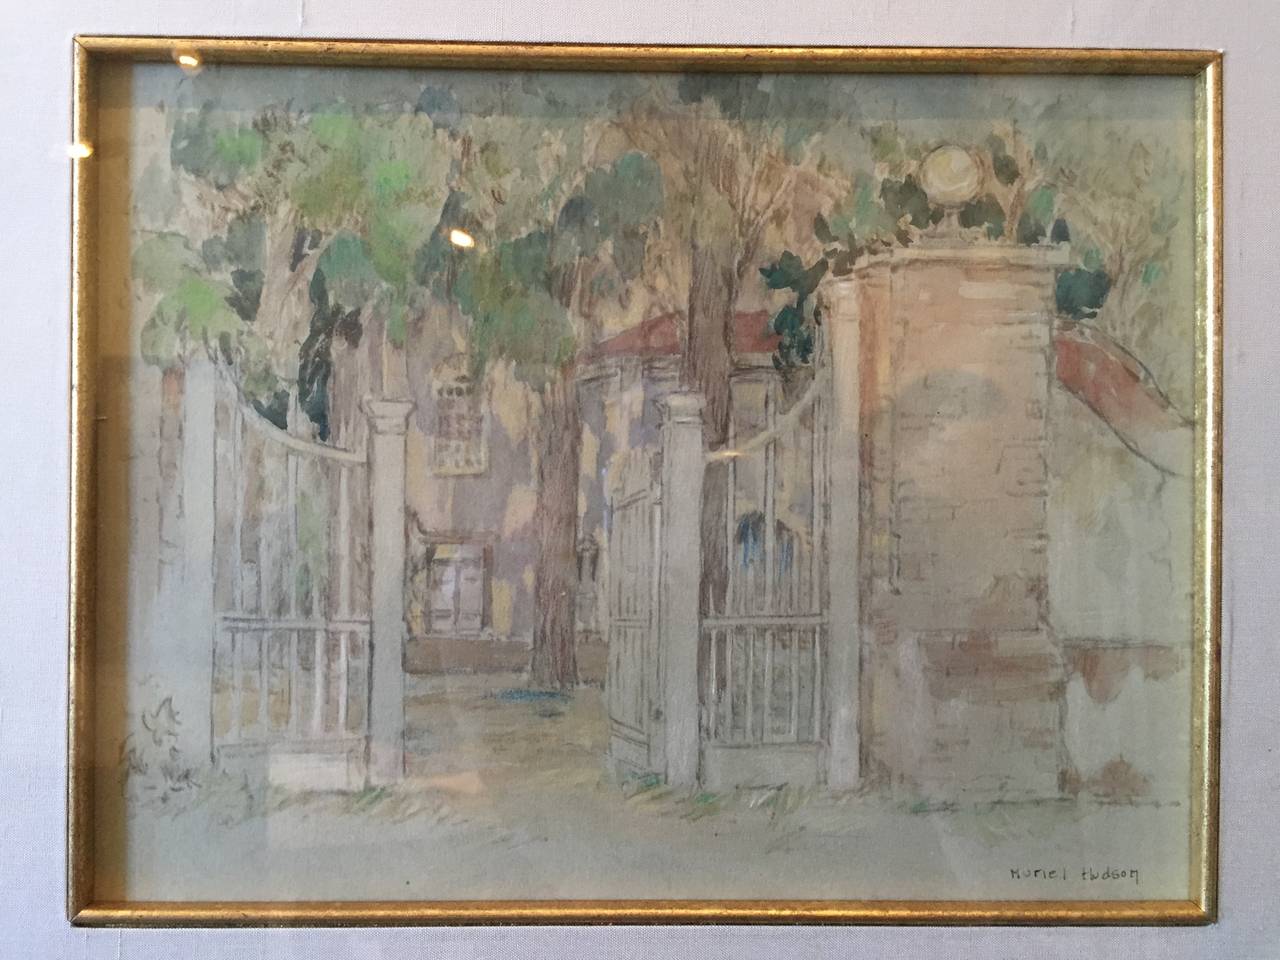 Beautifully painted delicate drawing watercolor signed on the lower left corner by Muriel Hudson (1890-1959).

Muriel Hudson is an artist born in Hamilton, Ontario, Canada in 1890. Resident of California in the 1920s and 1930s. Studied printmaking